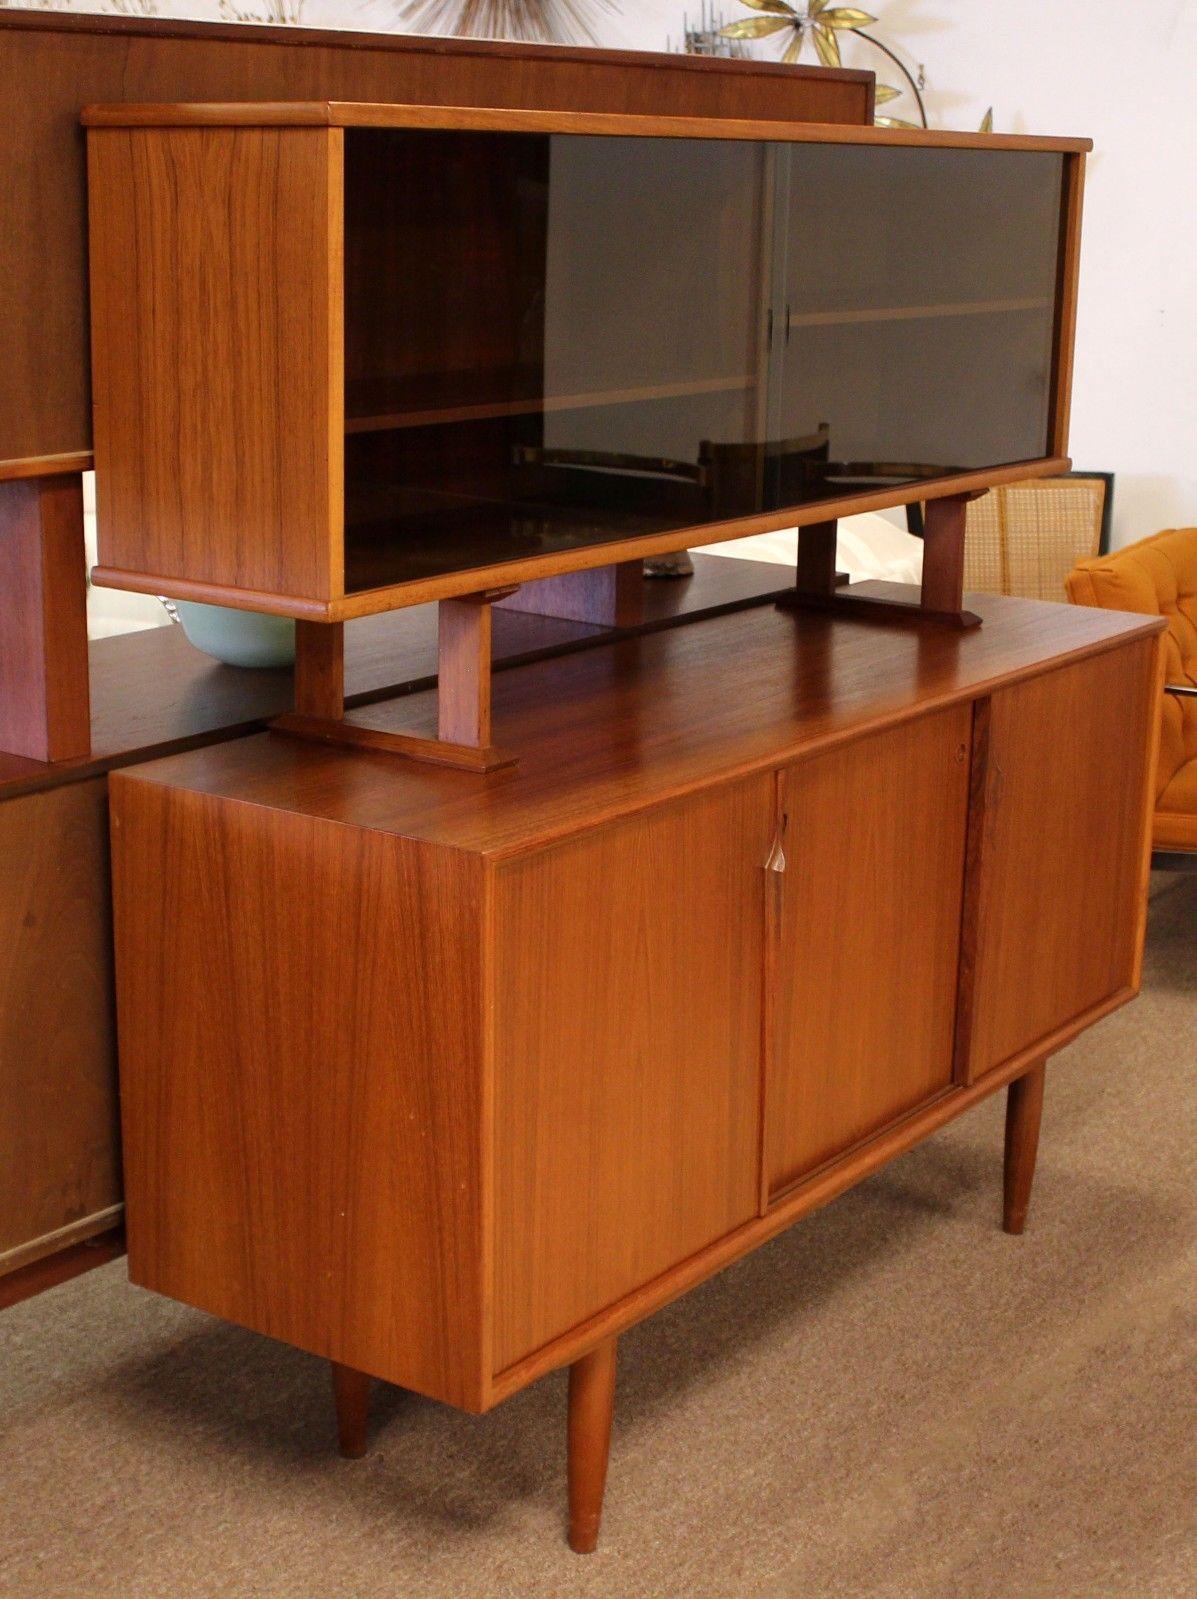 For your consideration is a marvelous, two-tiered sideboard, which features lower storage with a series of drawers and doors and a detachable upper shelving component with sliding glass doors, in the style of Kurt Ostervig. In excellent condition.